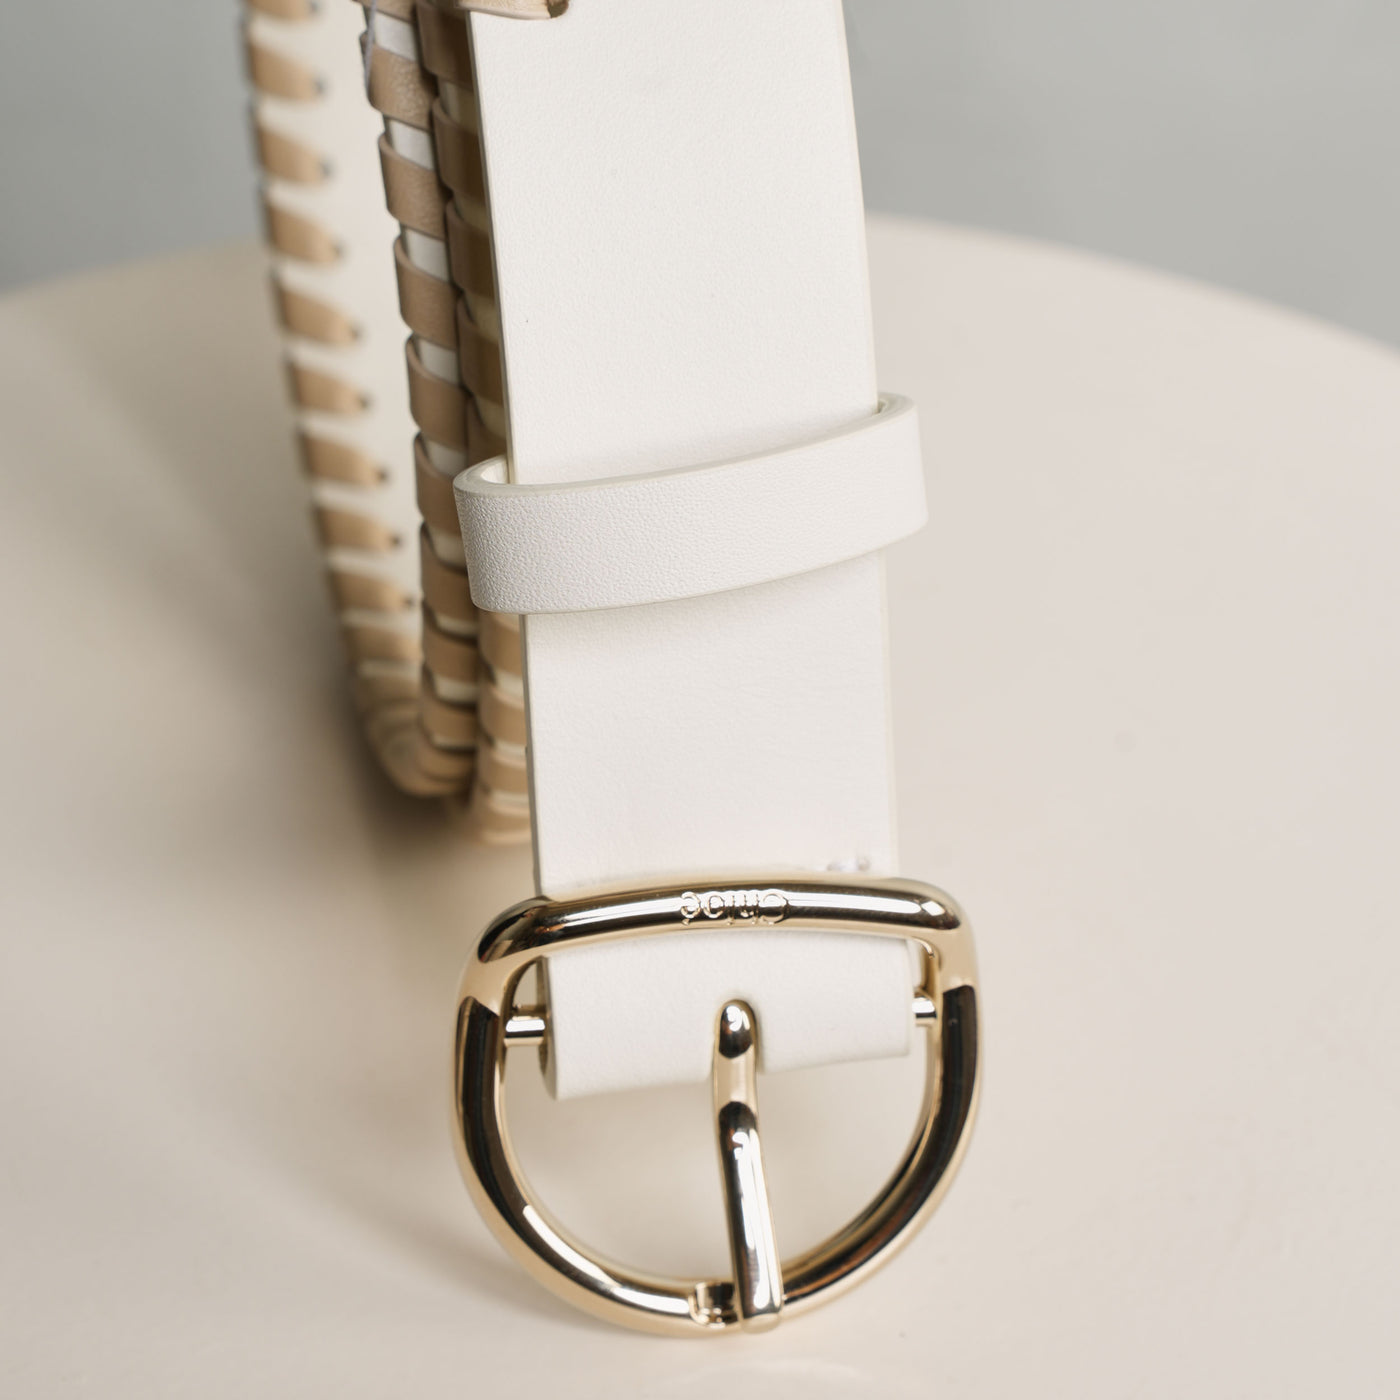 Chloé Mony Belt features beige-hued decorative whipstitching and a gold-toned buckle.